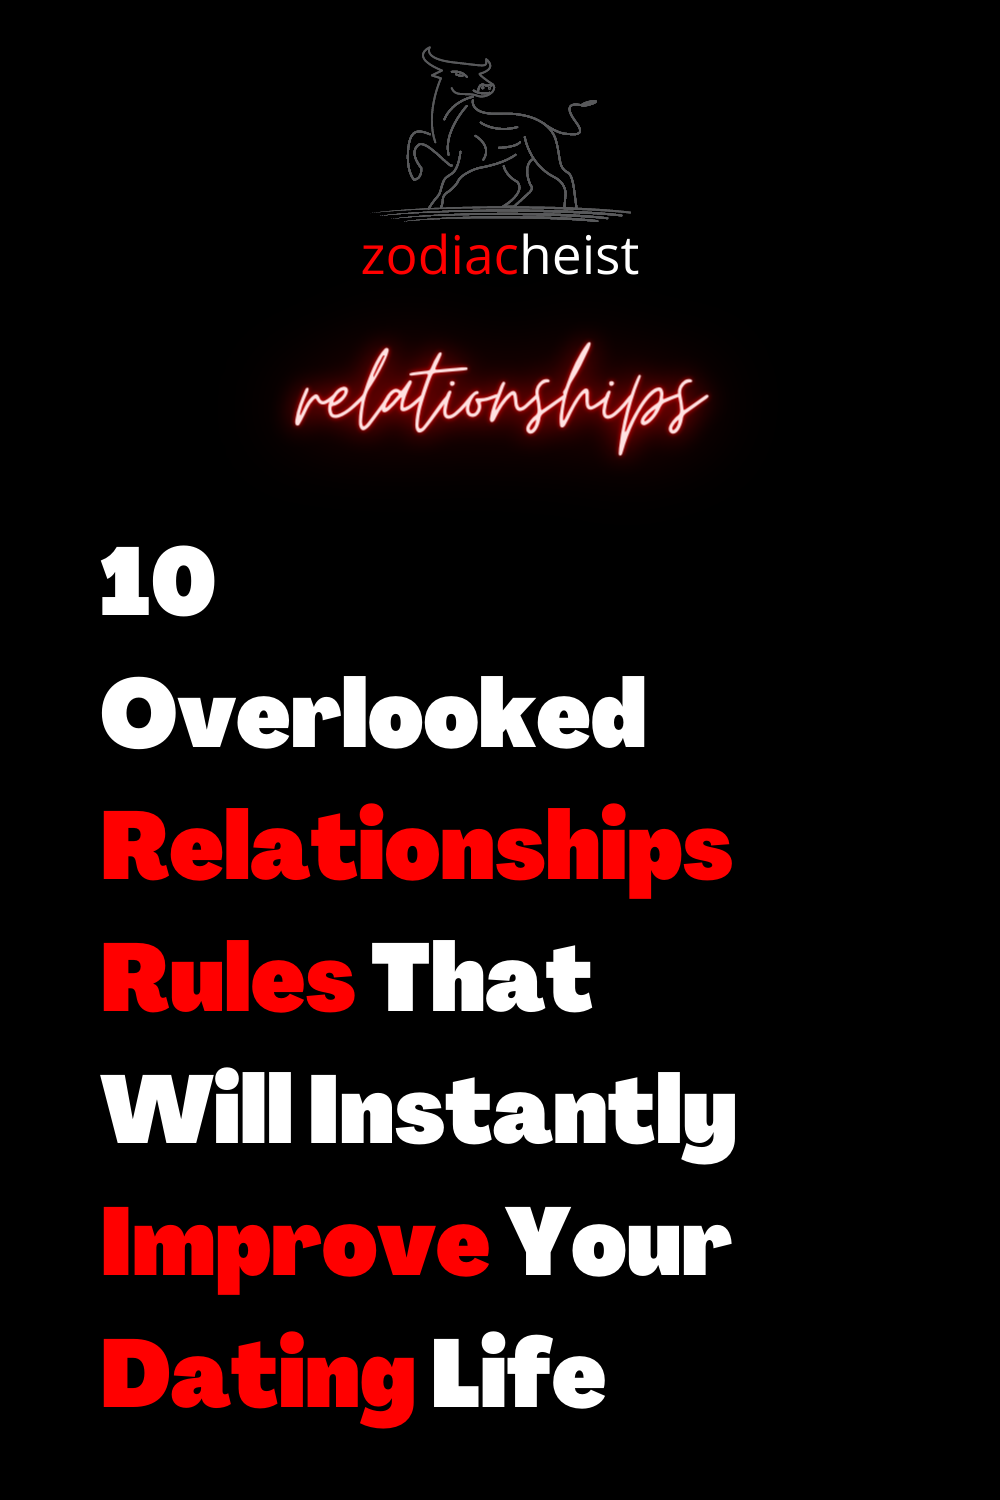 10 Overlooked Relationships Rules That Will Instantly Improve Your Dating Life